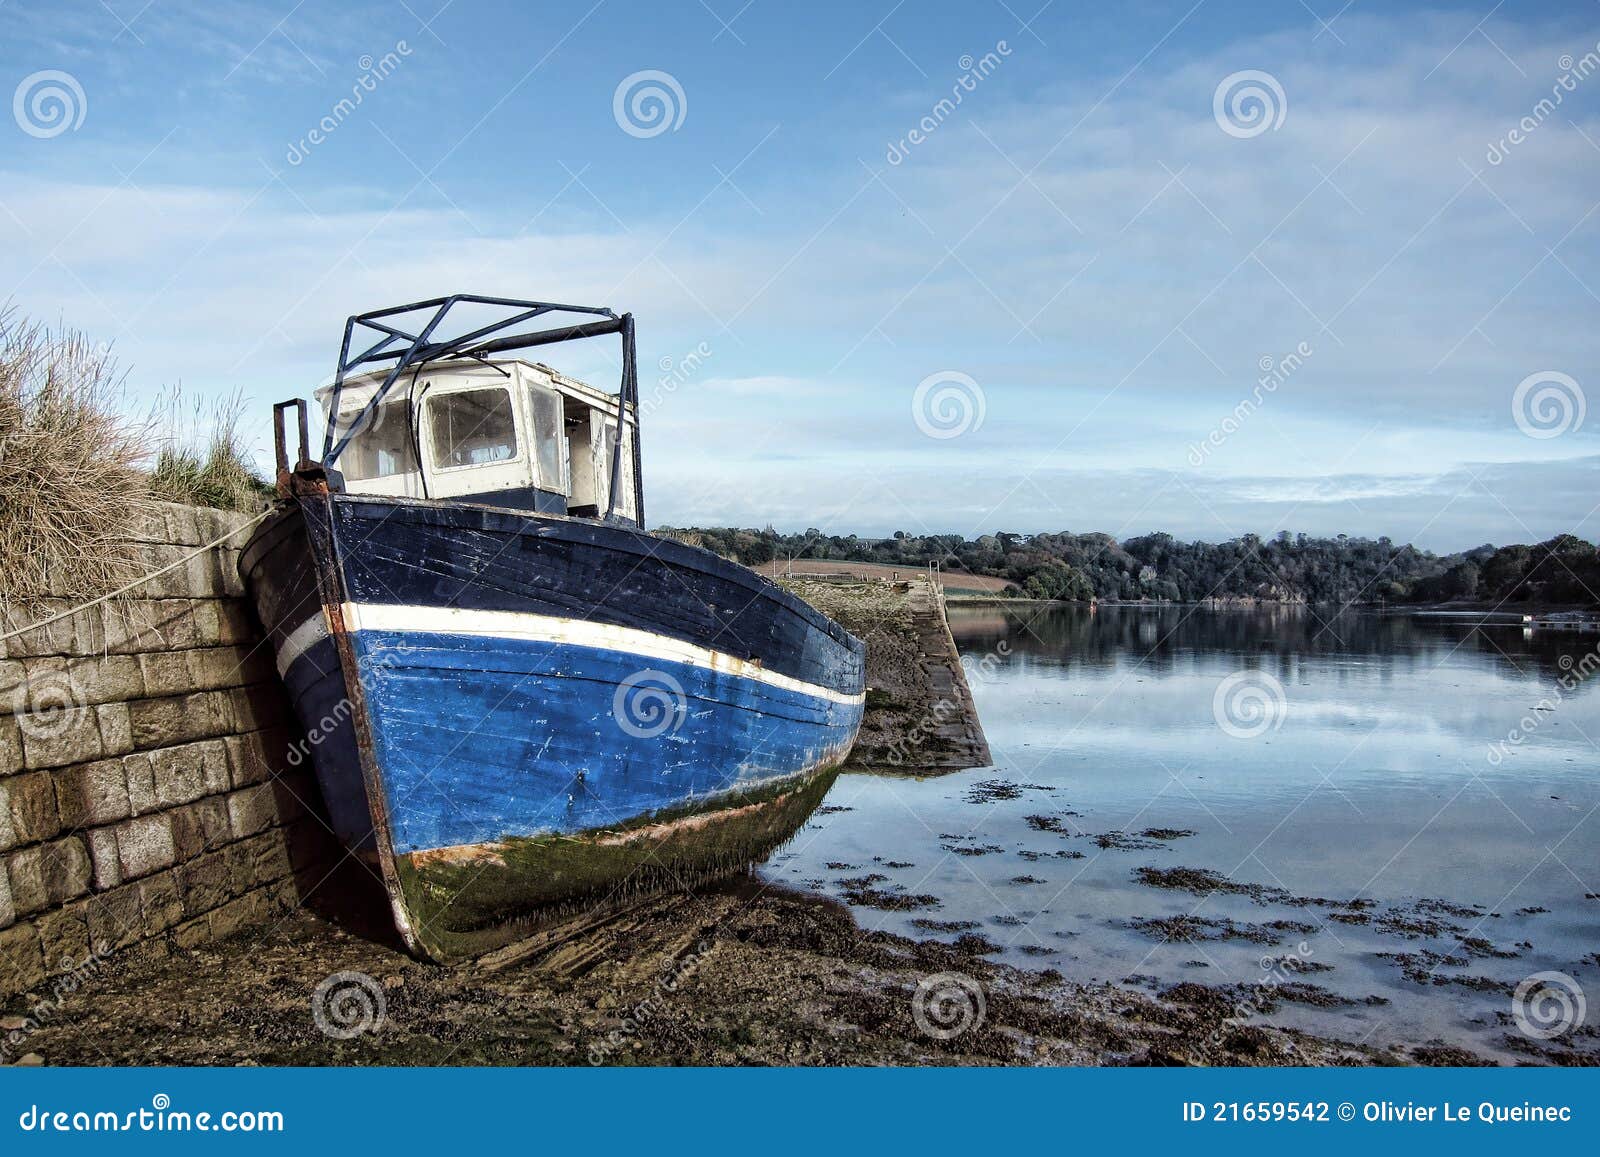 Abandoned Fishing Boat At Dock At Low Tide Stock Photography - Image 